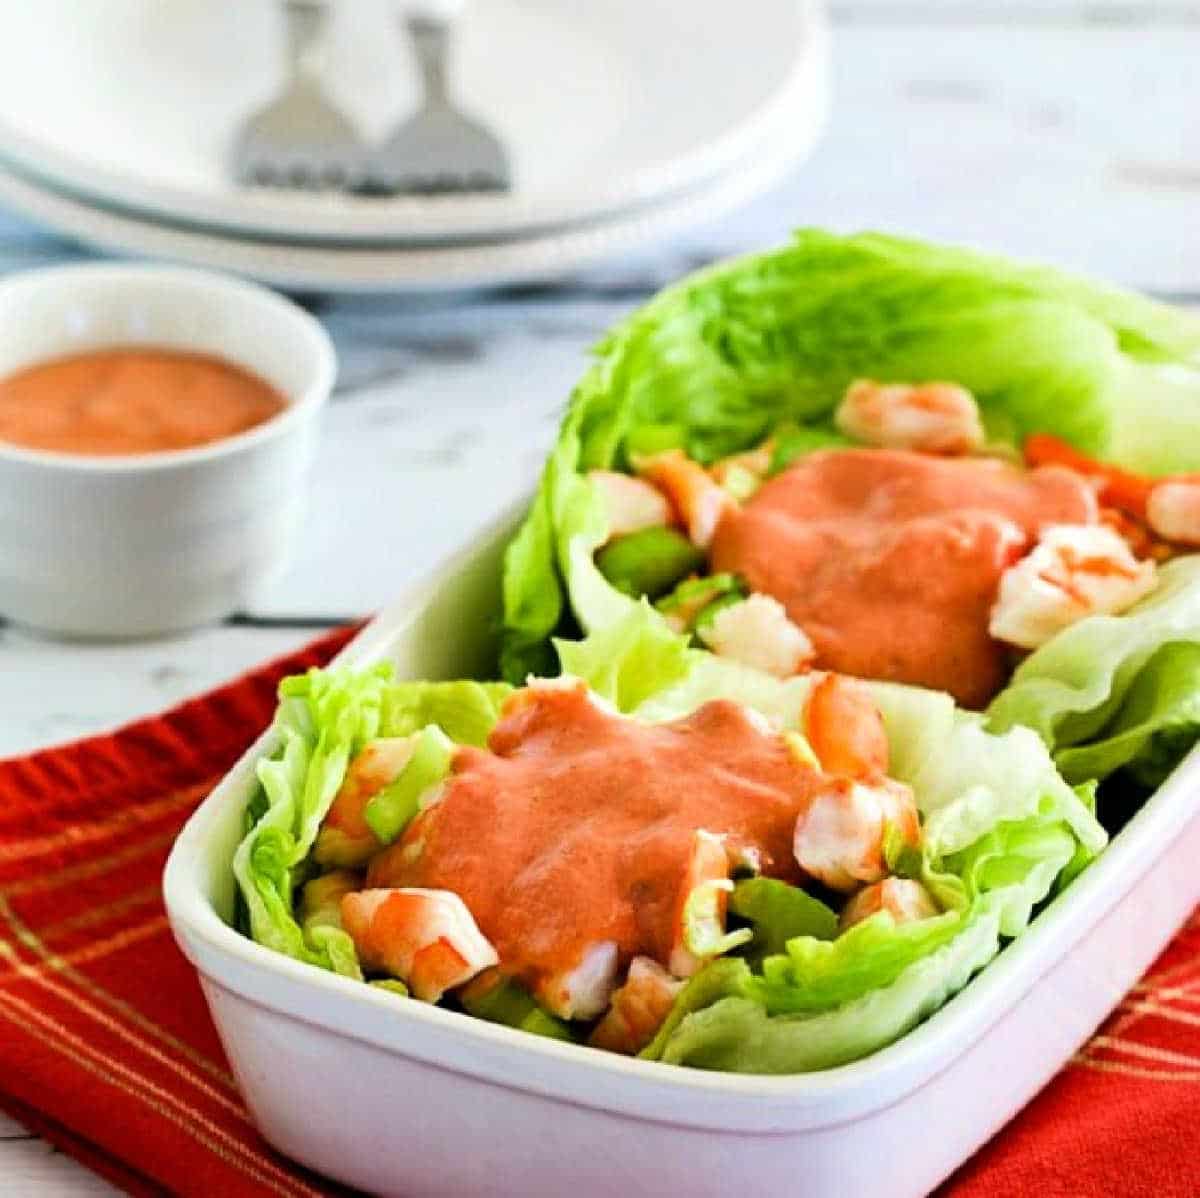 Shrimp lettuce wraps shown with two lettuce wraps in dish with cocktail sauce on the shrimp and on the side